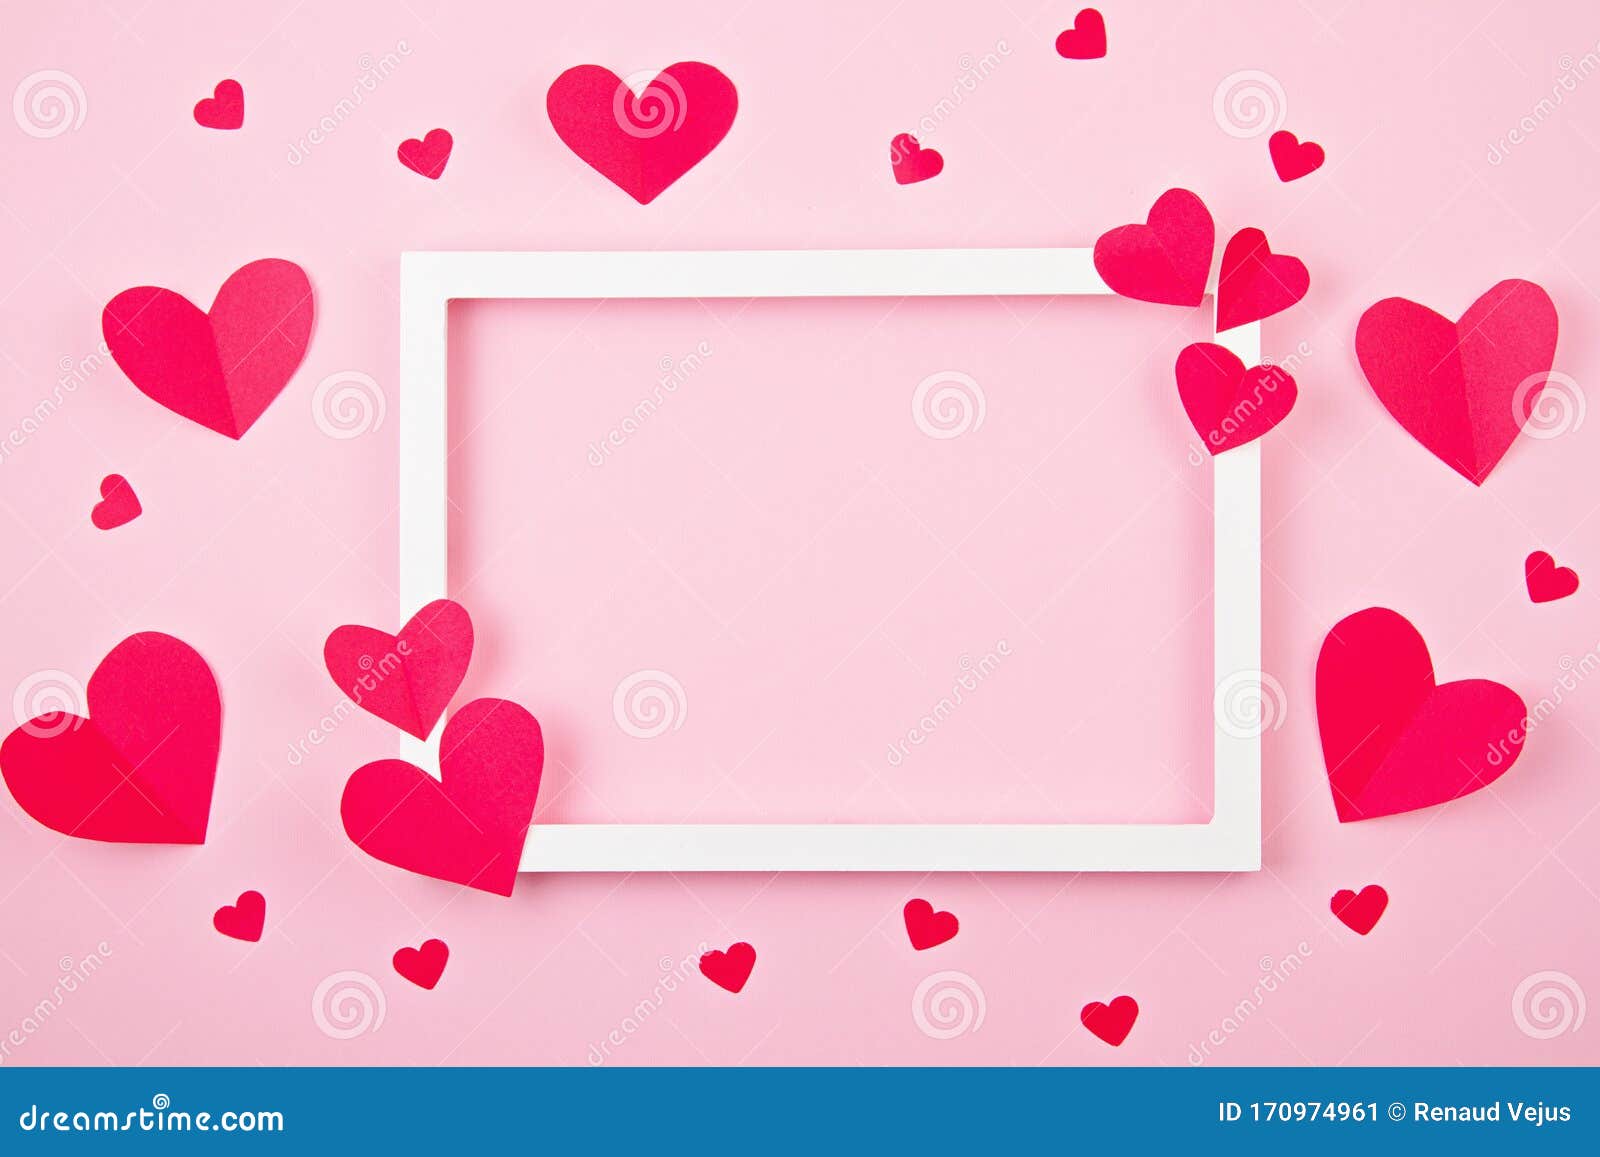 Paper Hearts and White Frame Over the Pink Pastel Background. Love ...